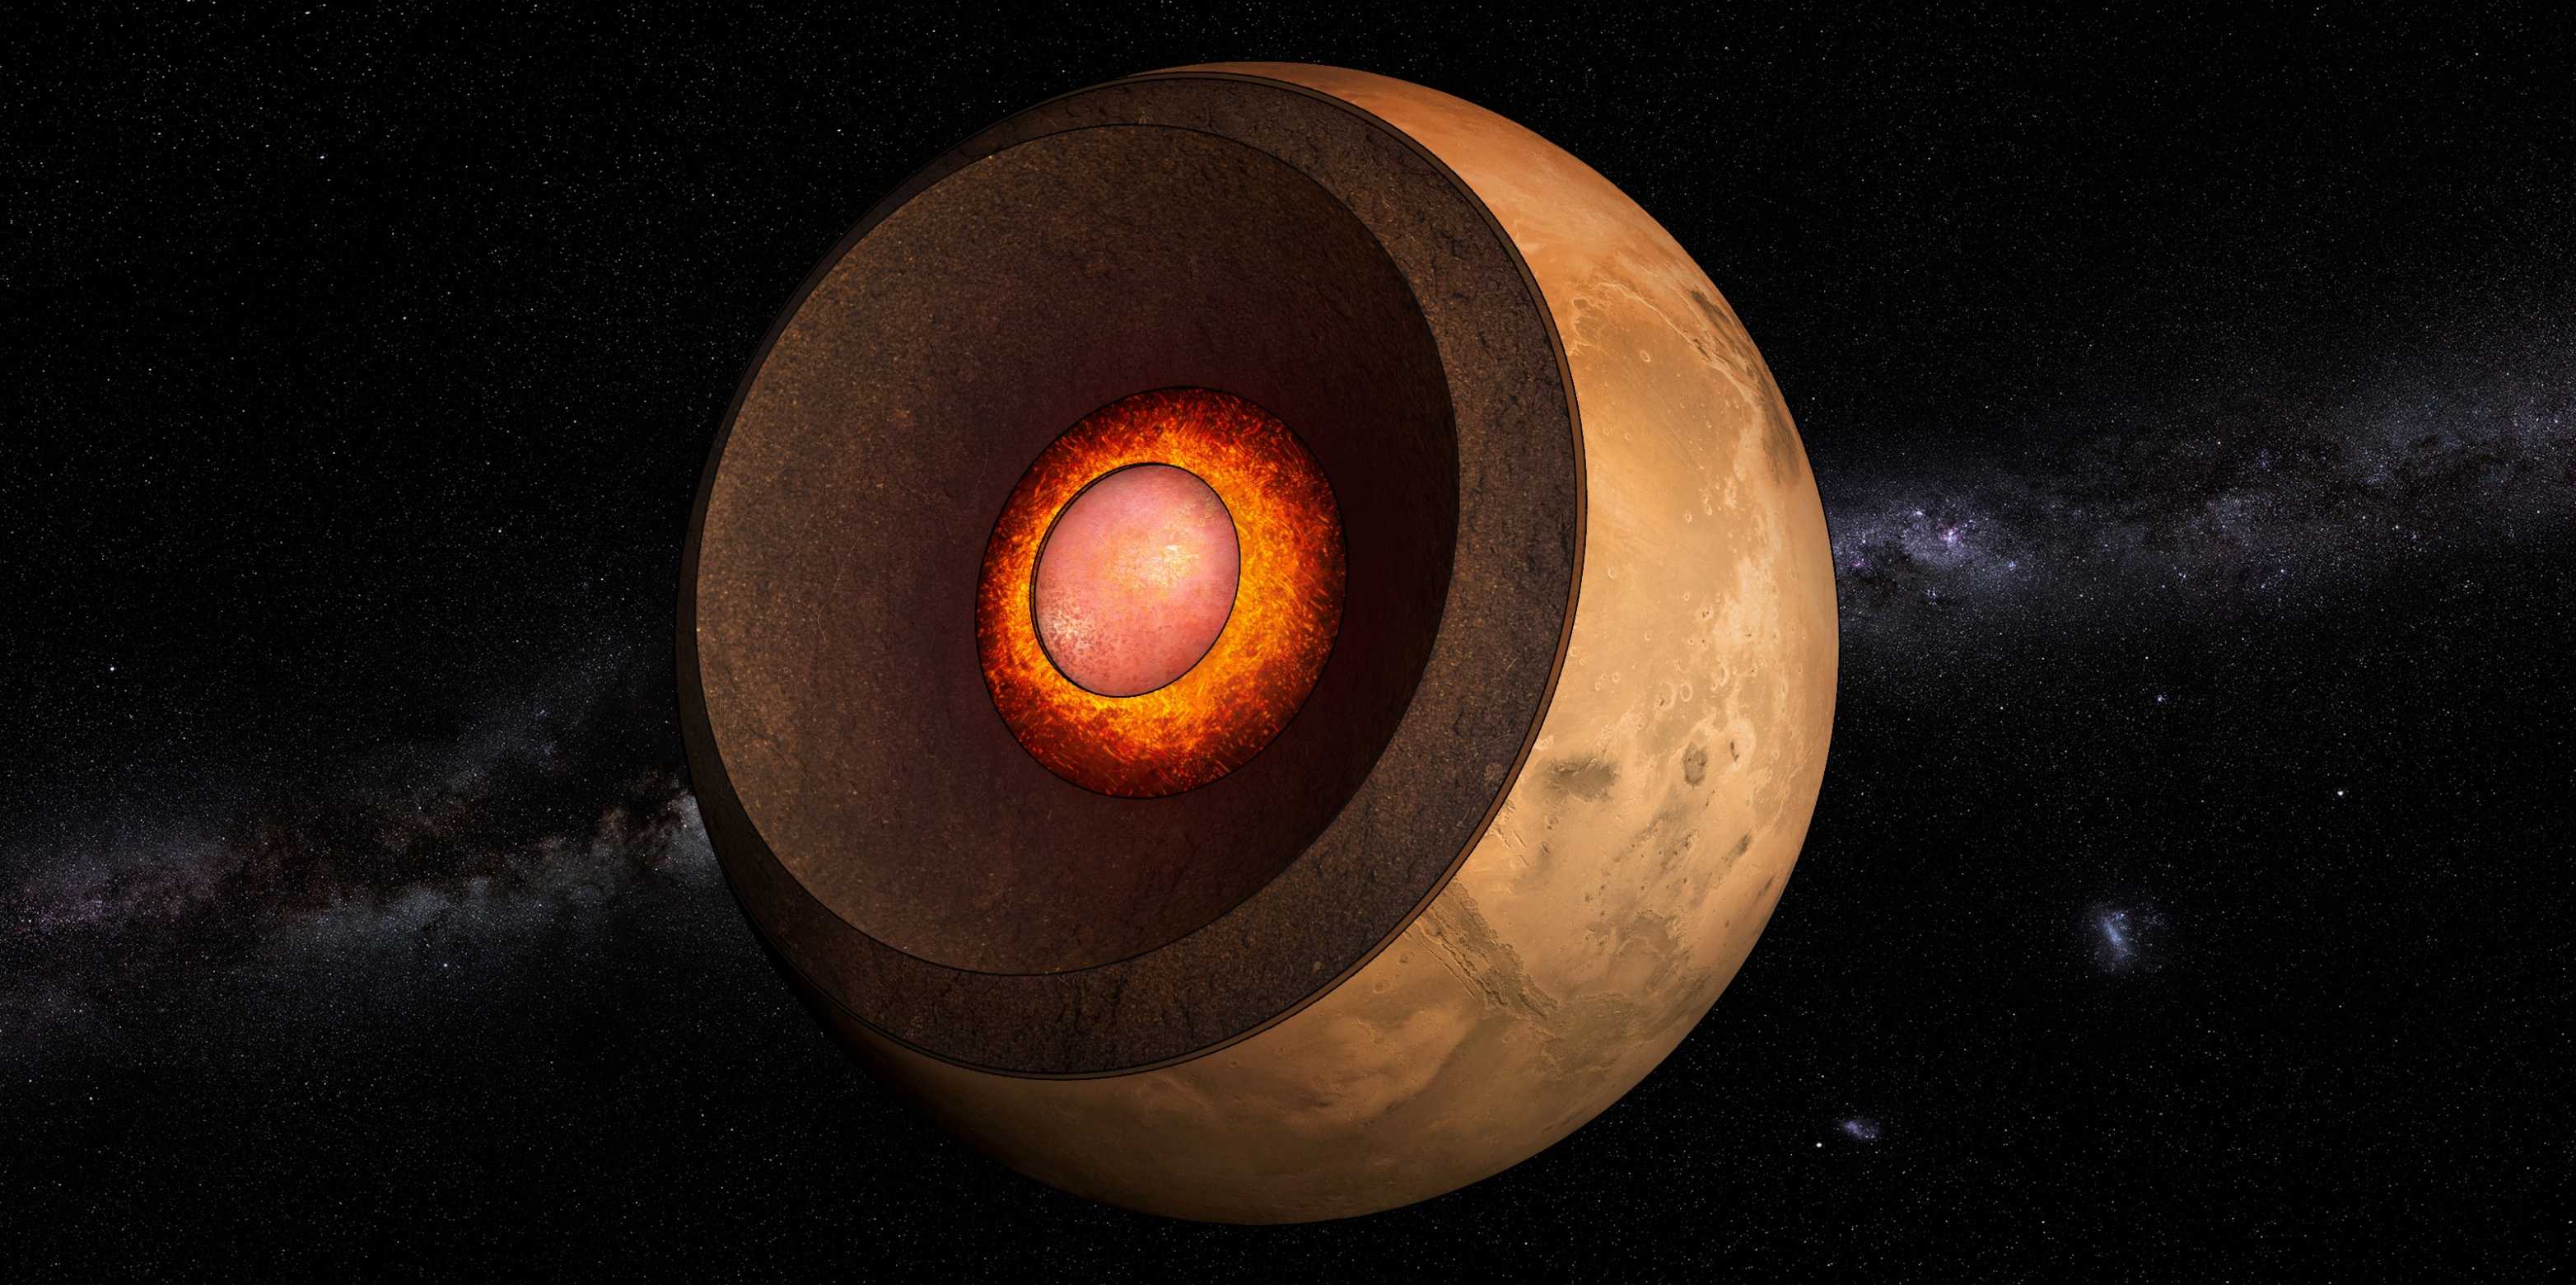 Illustration, Mars cut in two so that the nucleus is visible in the center